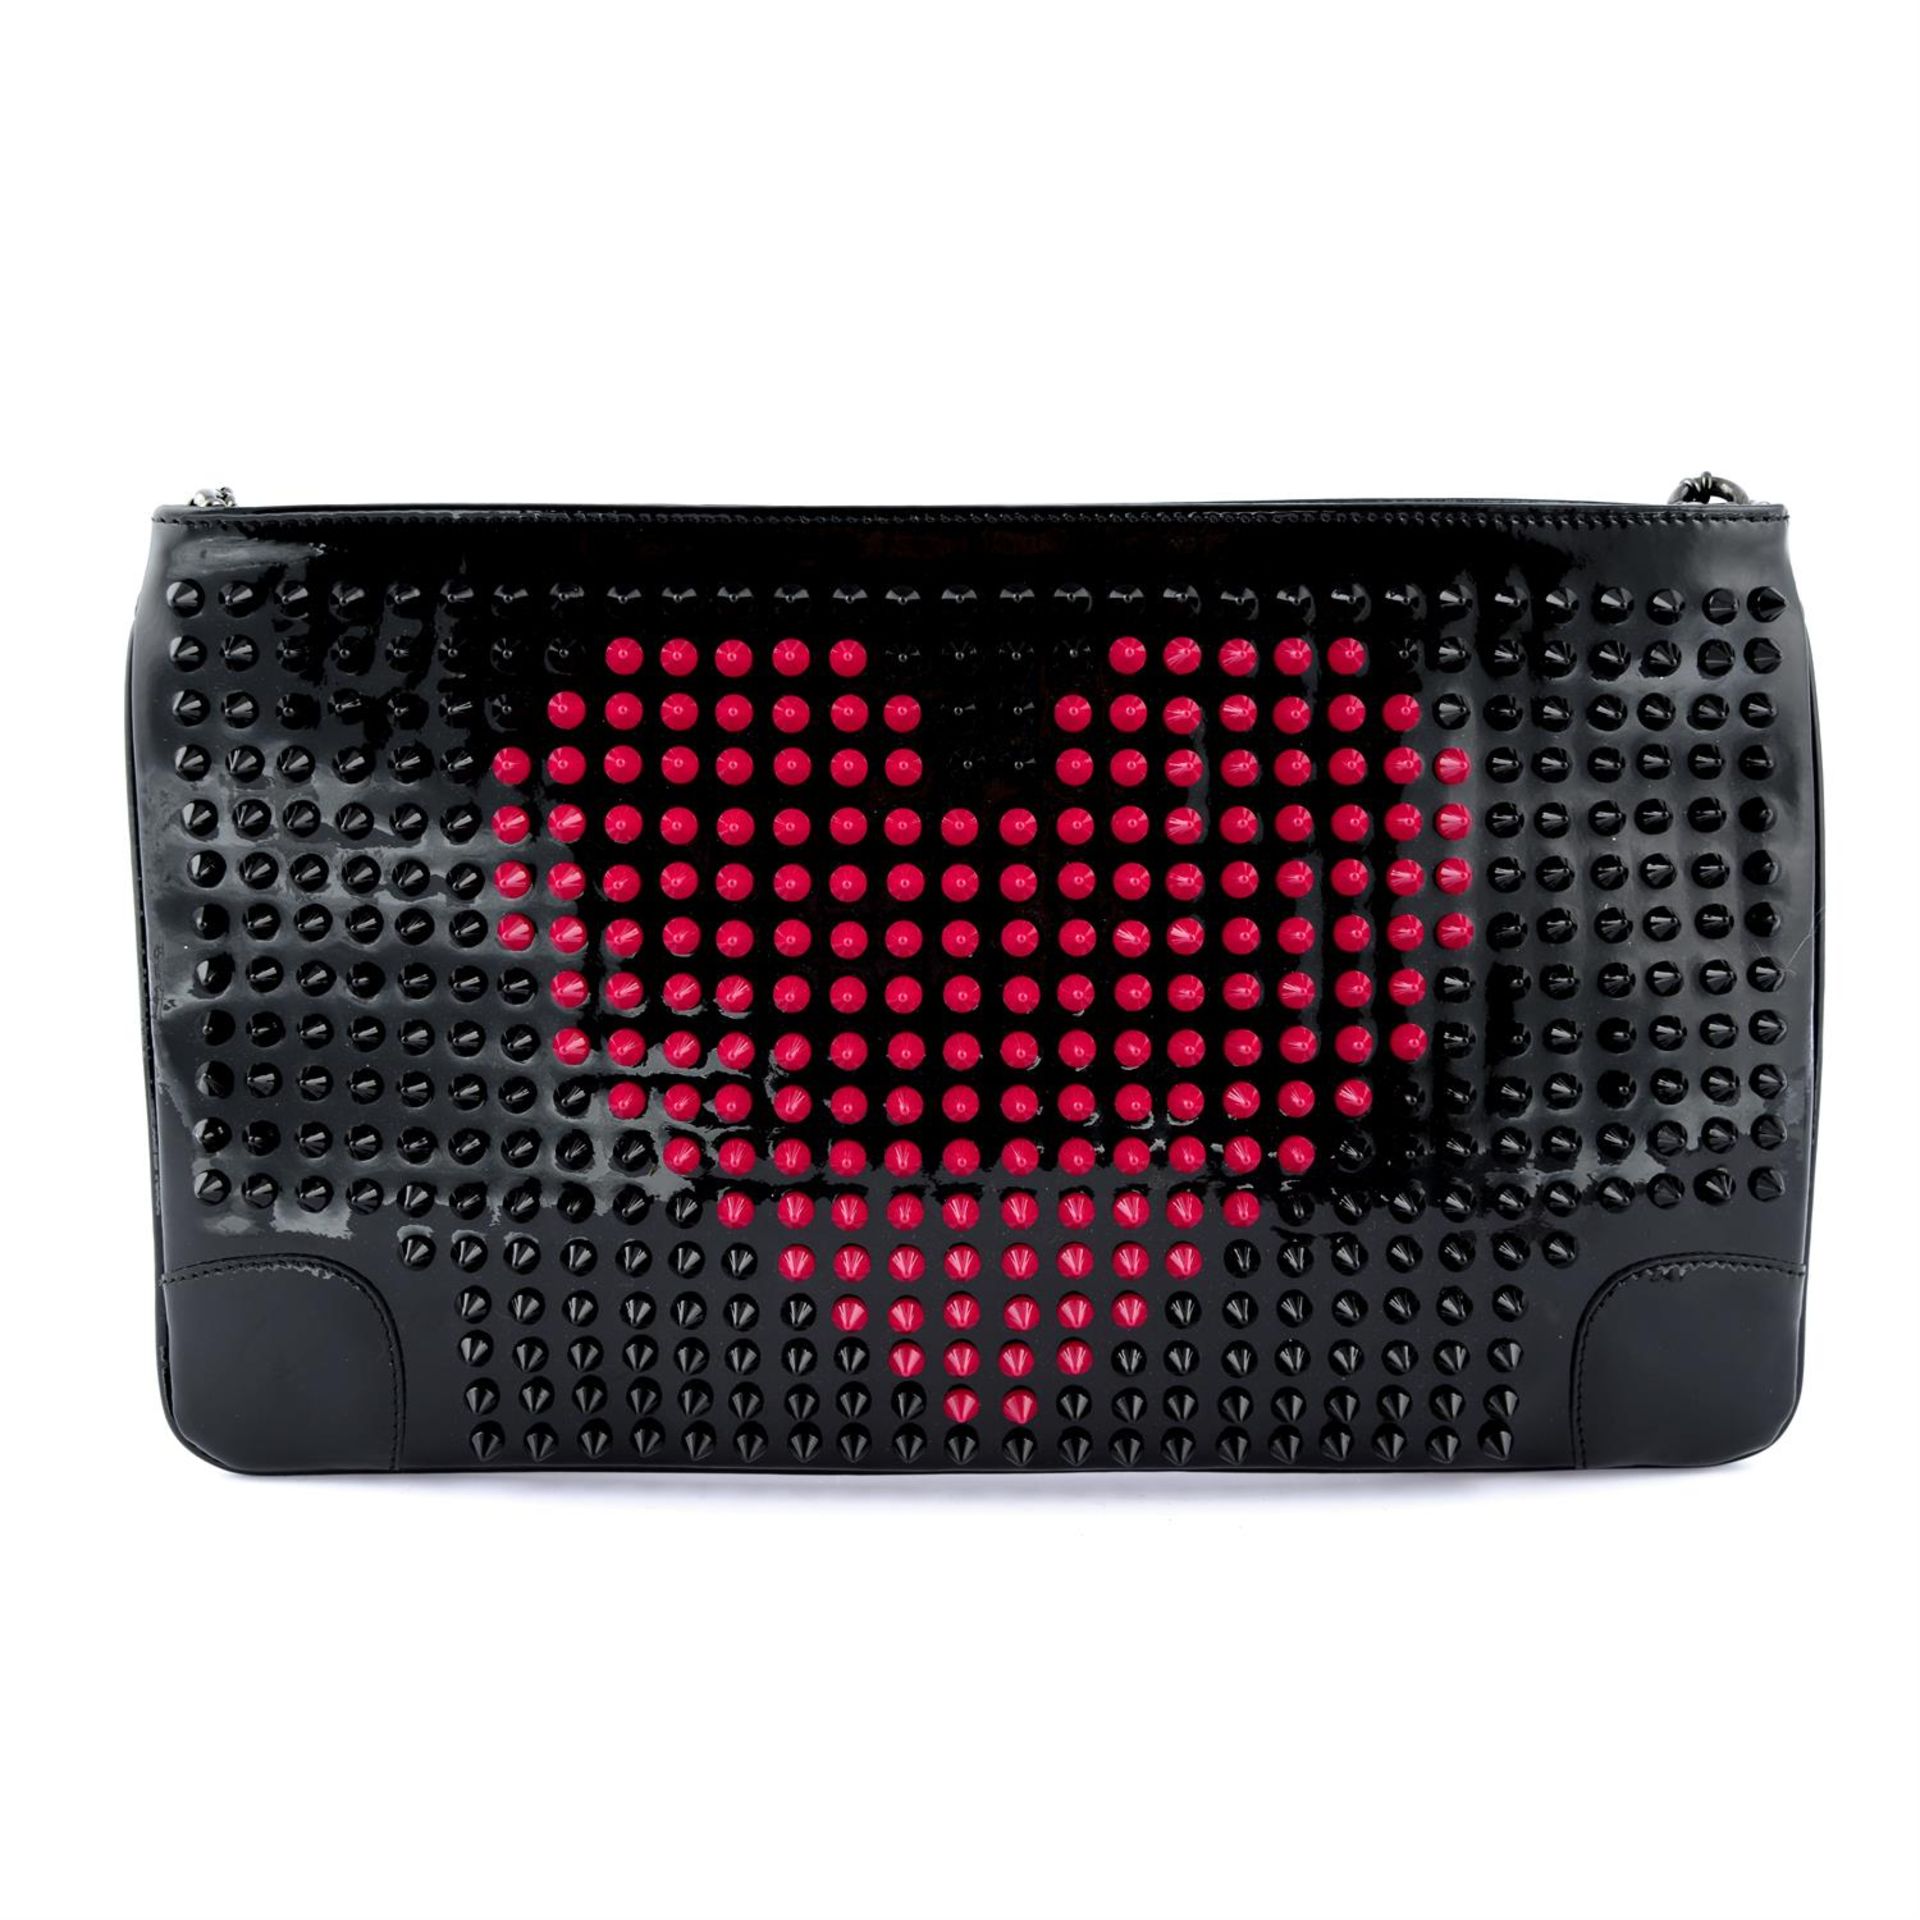 CHRISTIAN LOUBOUTIN - a black patent leather spiked Loubiposh Valentines clutch bag.